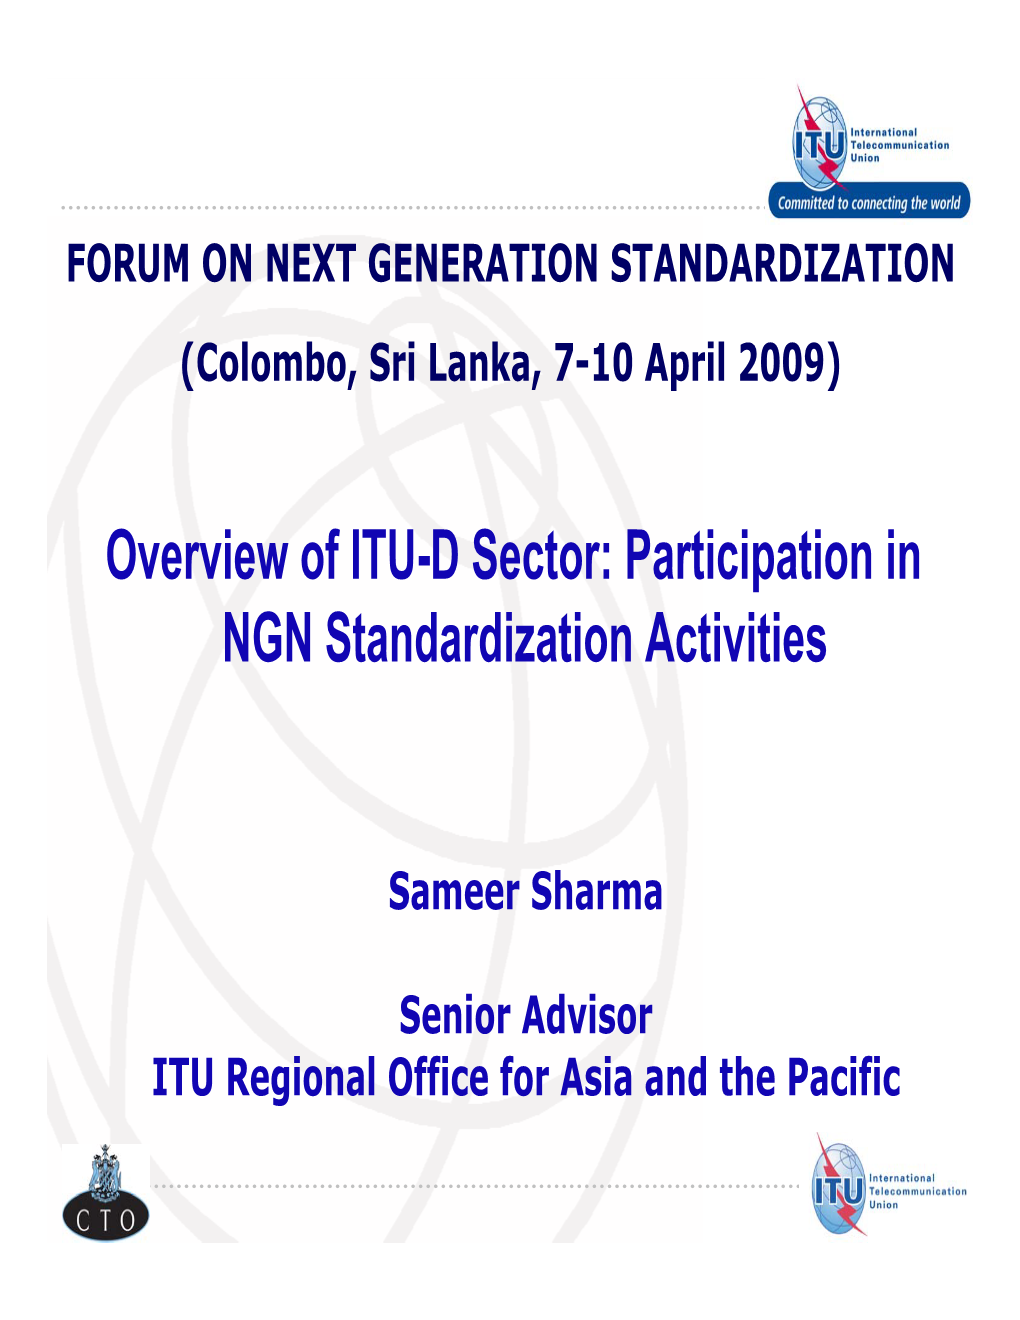 Overview of ITU-D Sector: Participation in NGN Standardization Activities